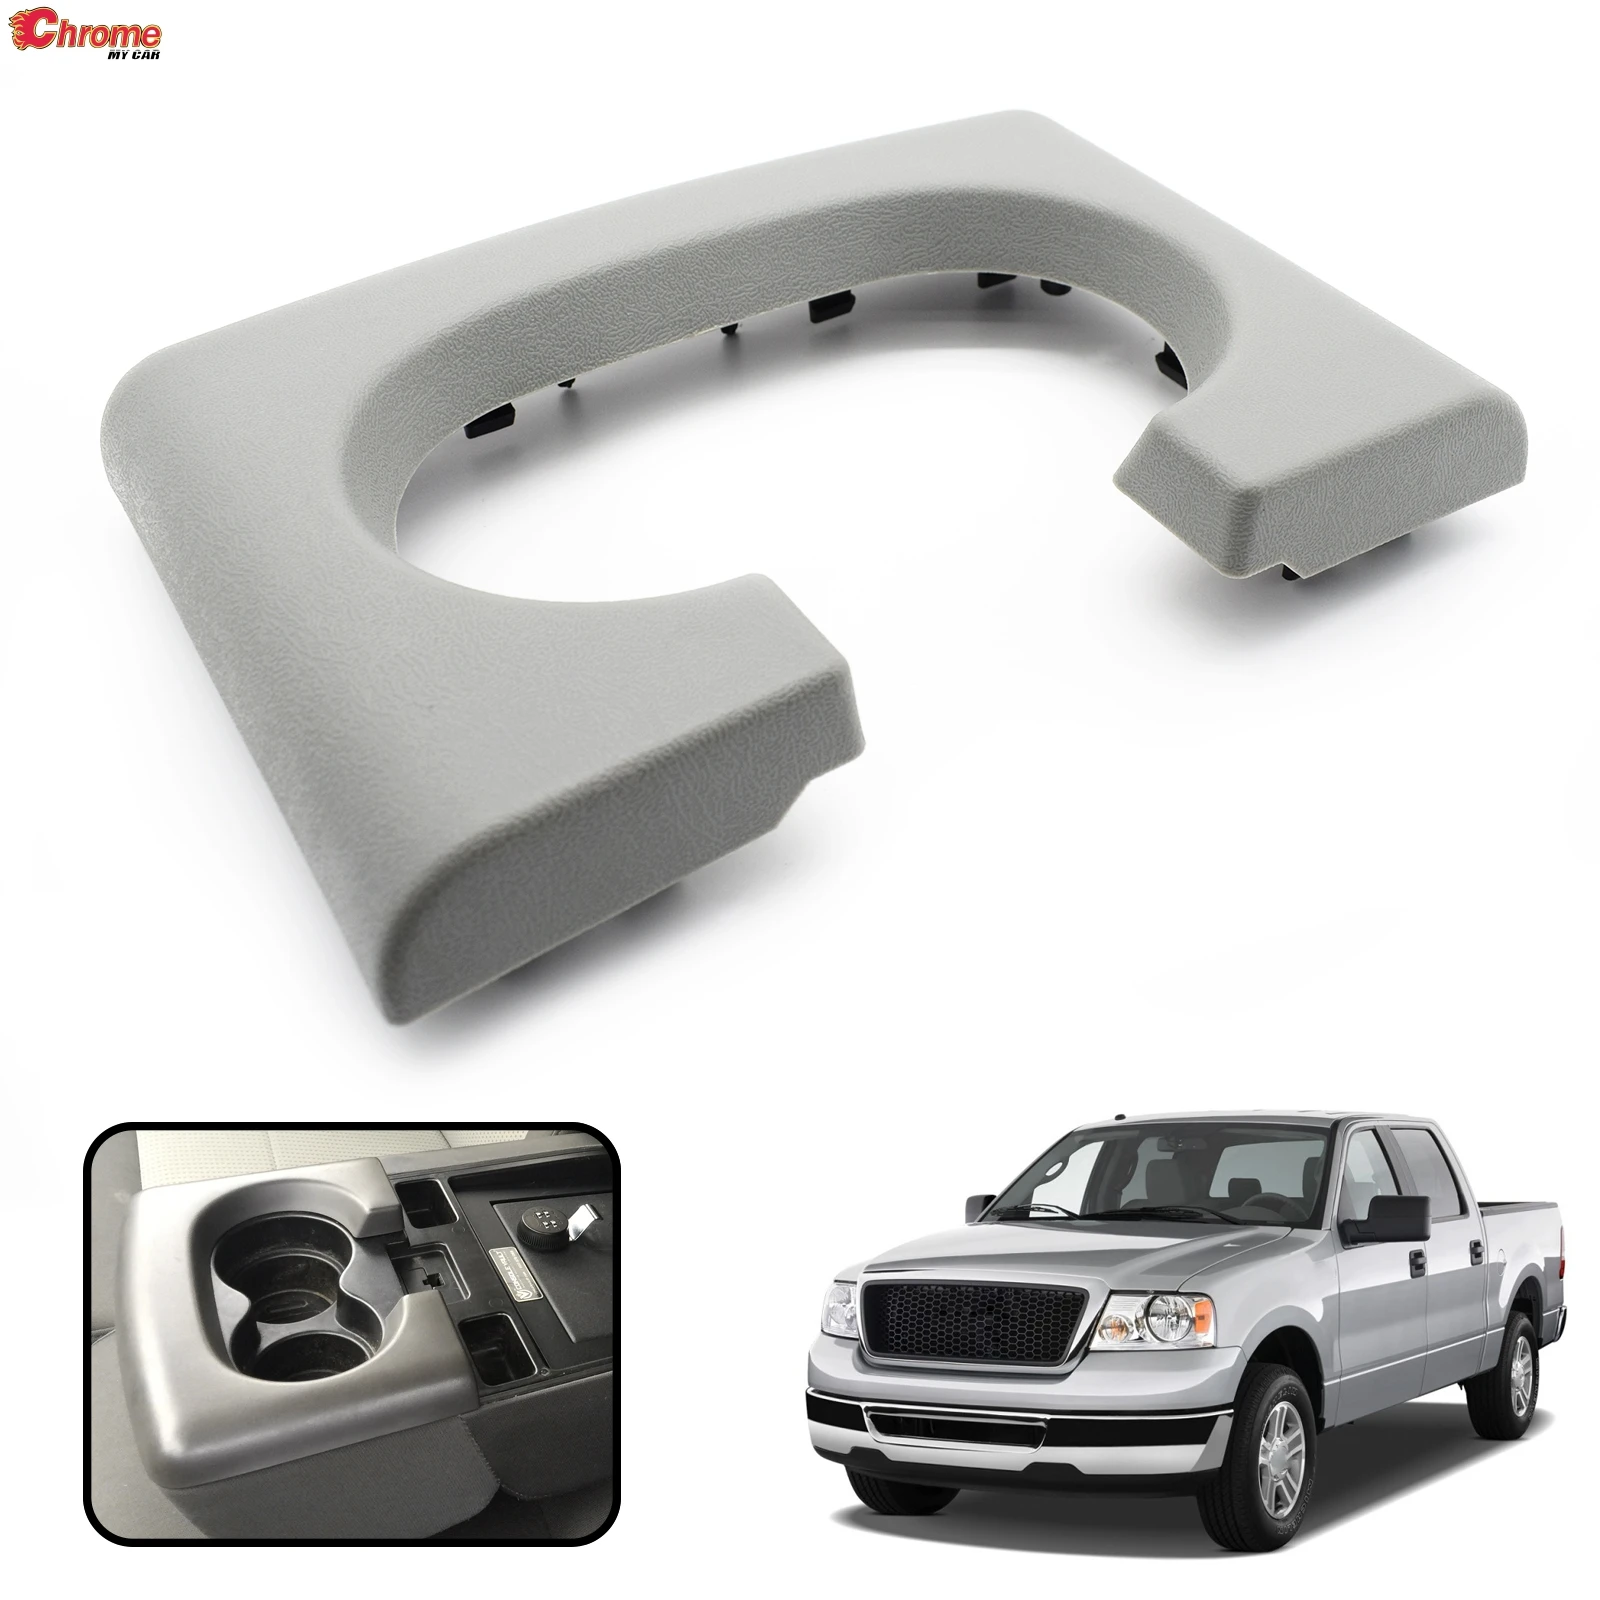 Car Accessories Center Console Cup Holder Armrest Pad Replacement For Ford F150 F-150 2004 - 2008 2009 2010 2011 2012 2013 2014